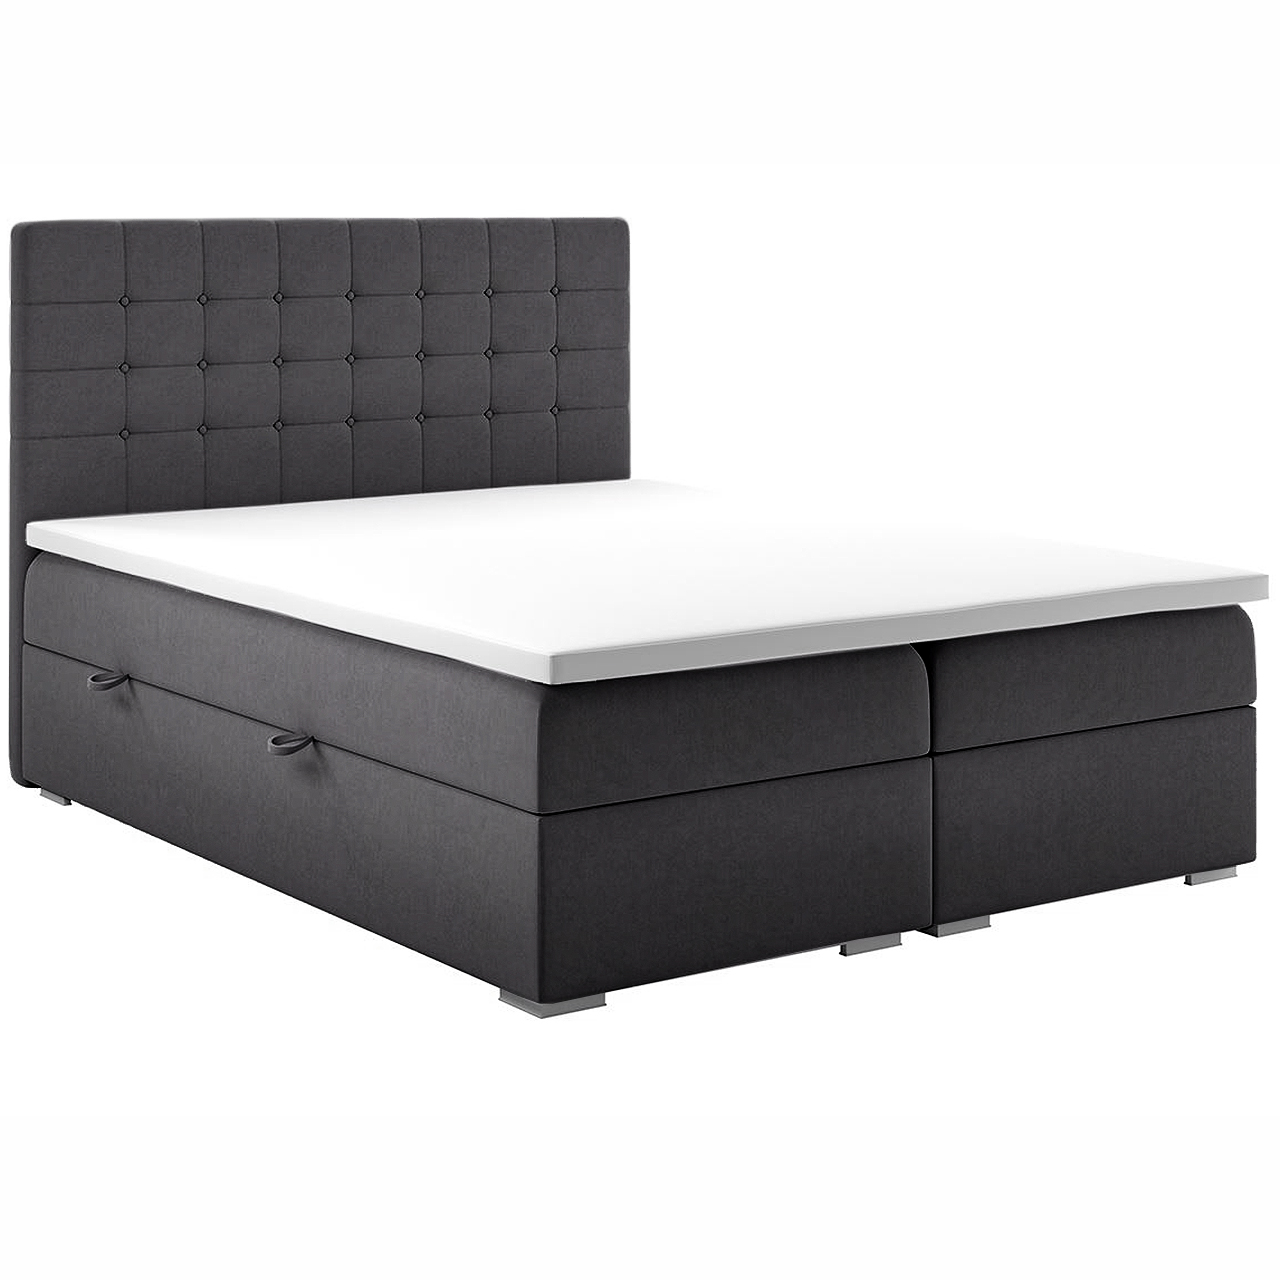 Upholstered bed CLAUDIS 160x200 monolith 92